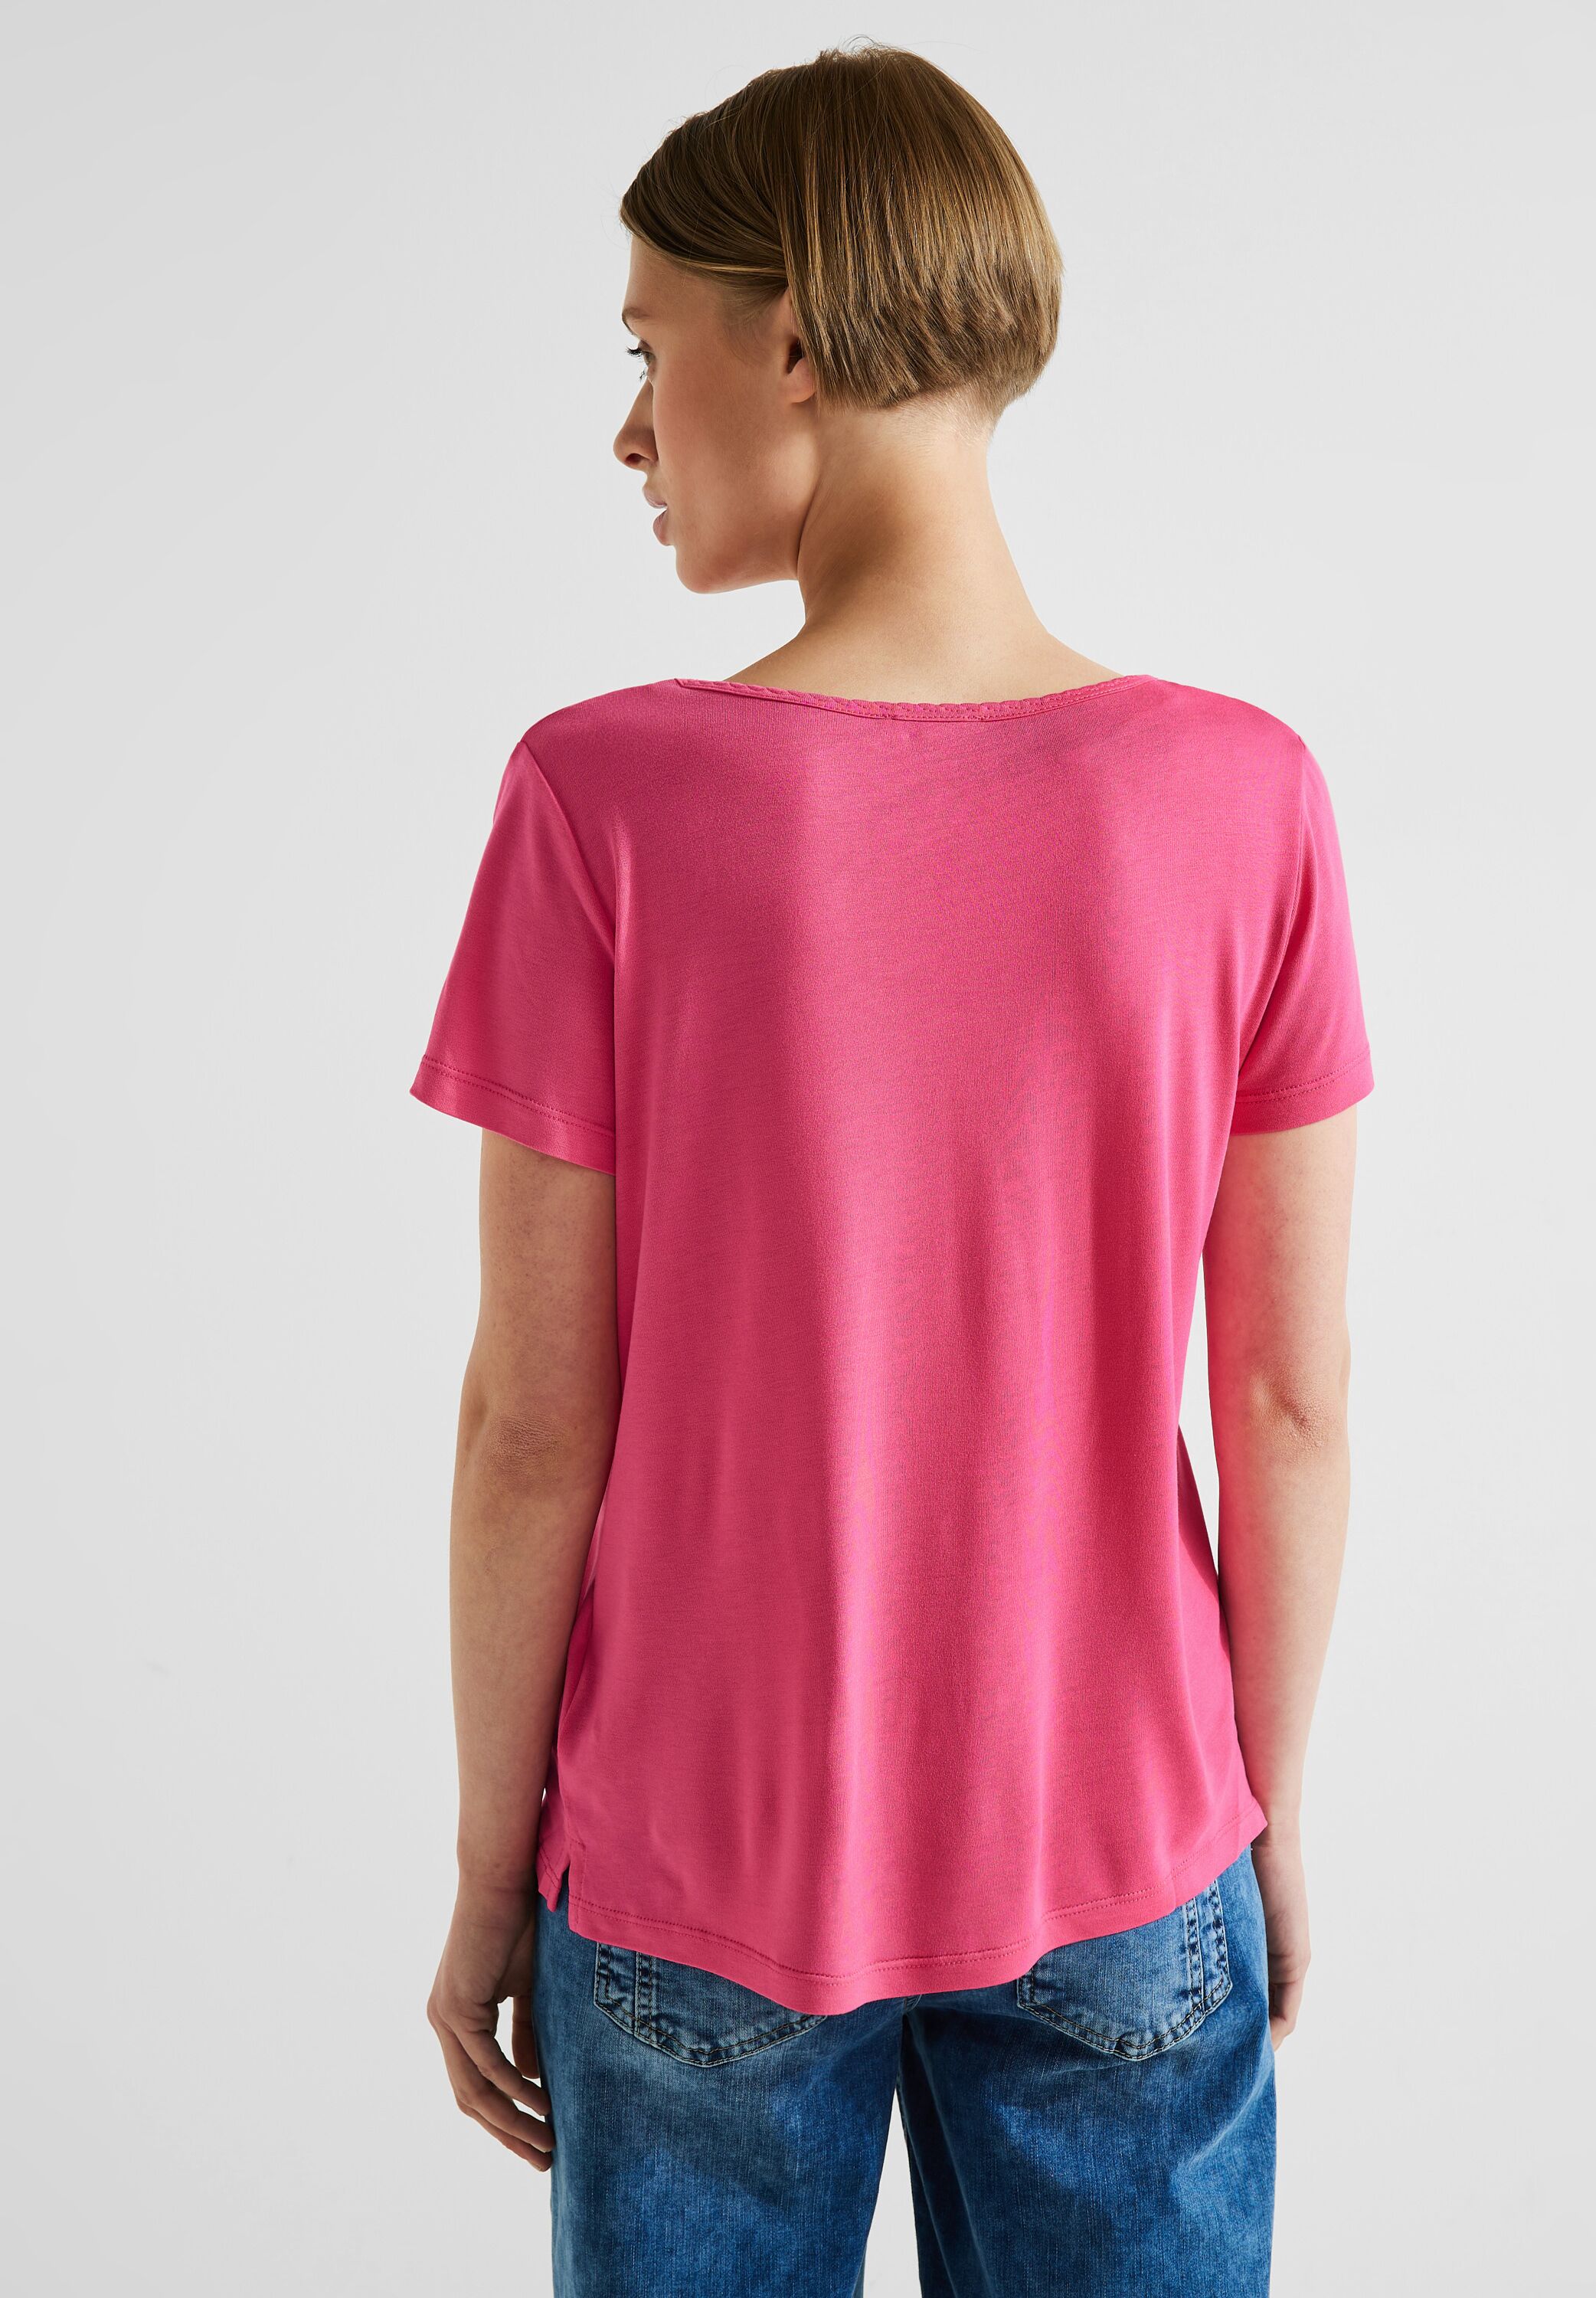 Street One T-Shirt CONCEPT Mode Berry reduziert im Rose - SALE in A320124-14647